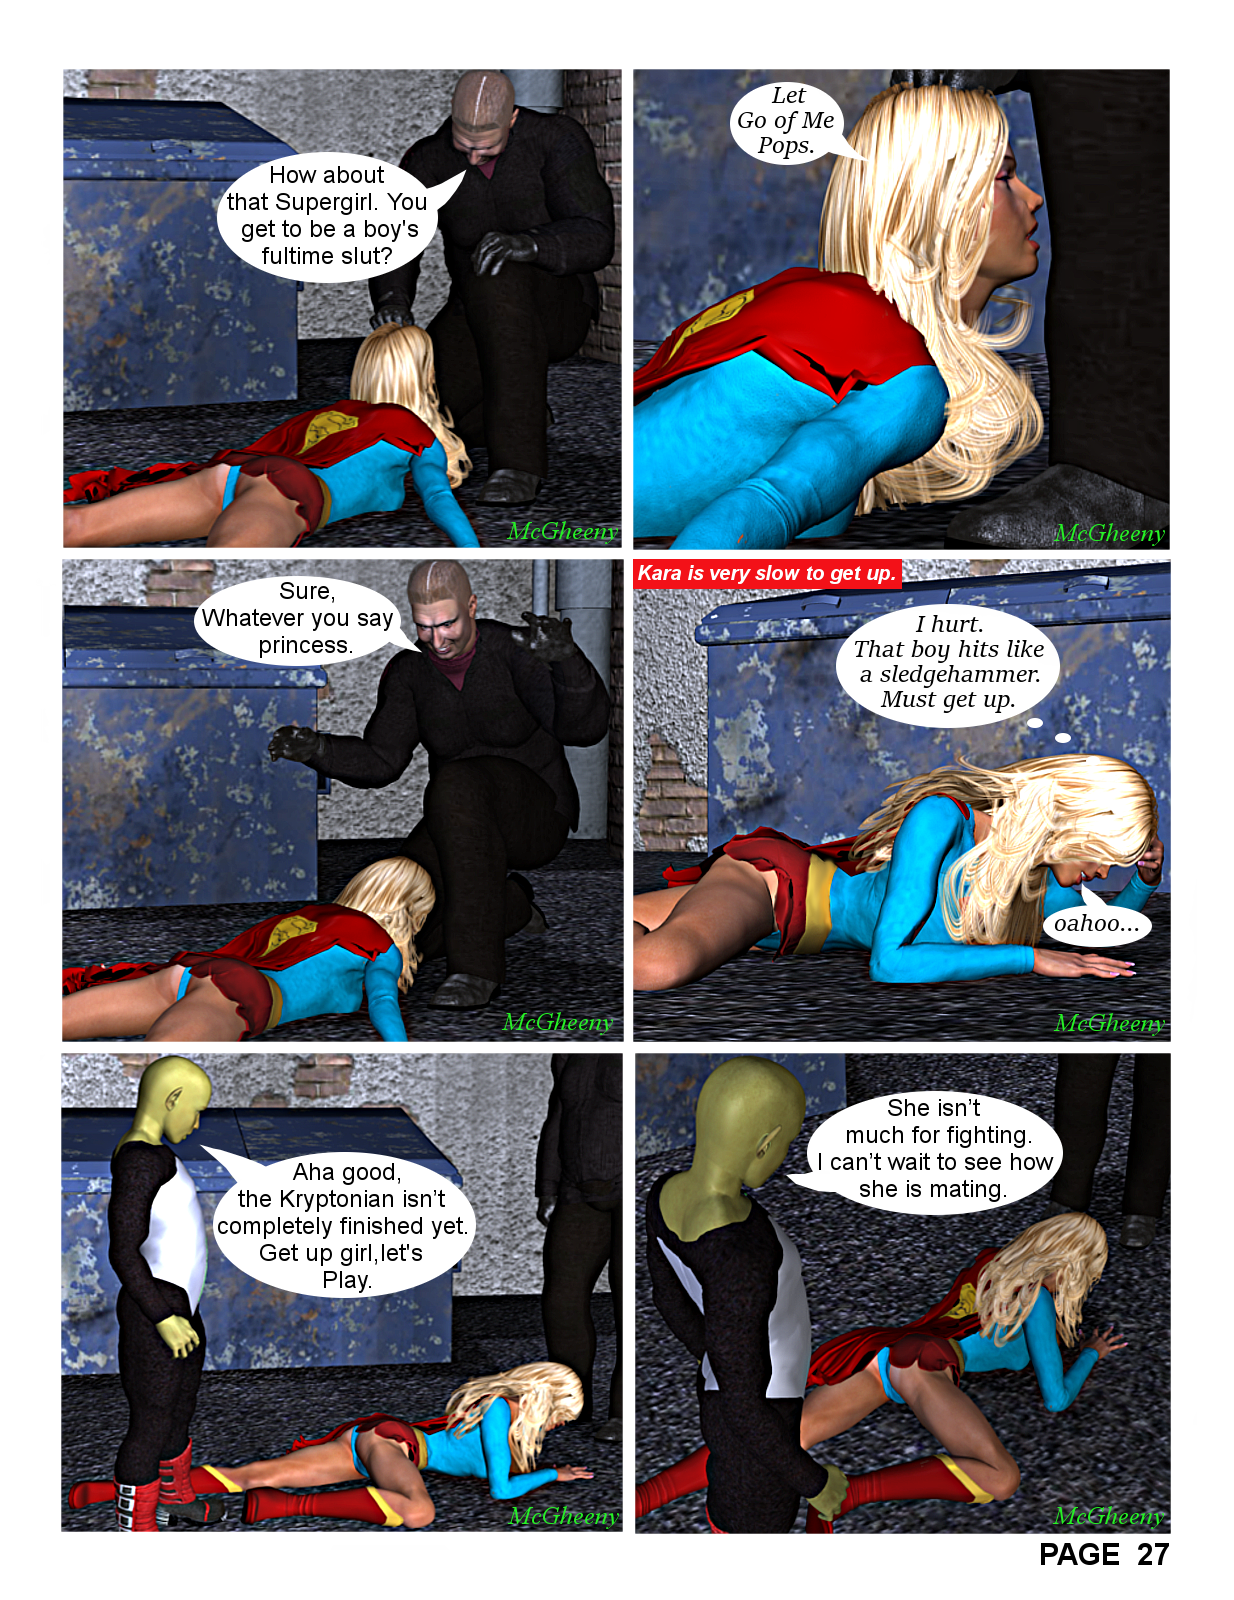 Supergirl in Banors Prize Page 27.png